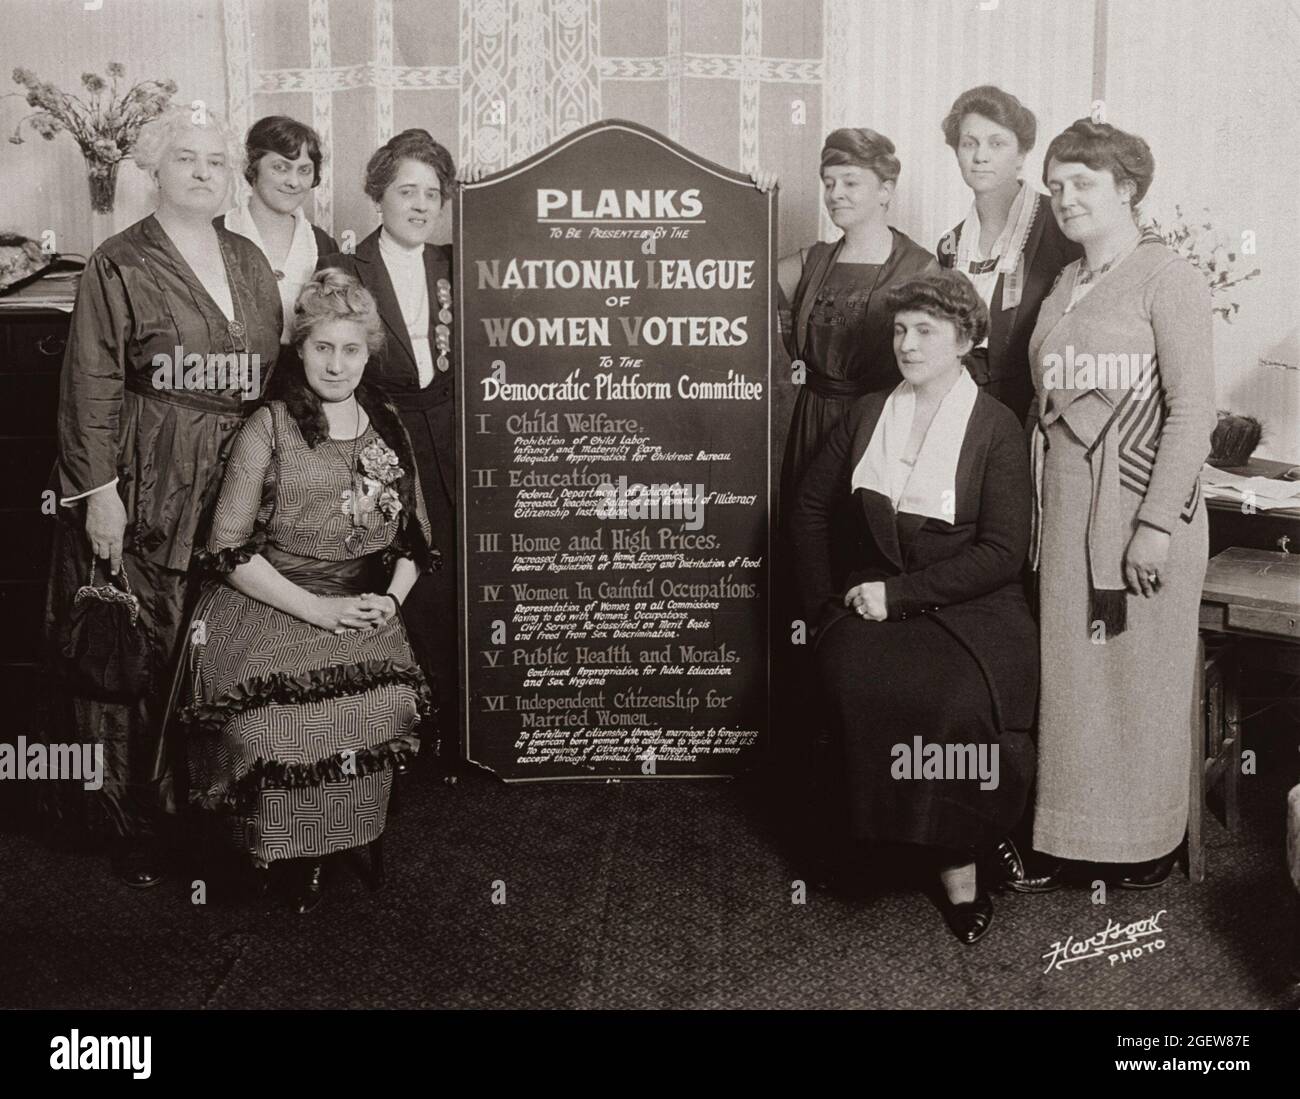 Pattie Ruffner Jacobs (left) and Maud Wood Park (right) holding a sign listing the planks to be presented by the NLWV to the Democratic Platform Committee, June 1920. Stock Photo